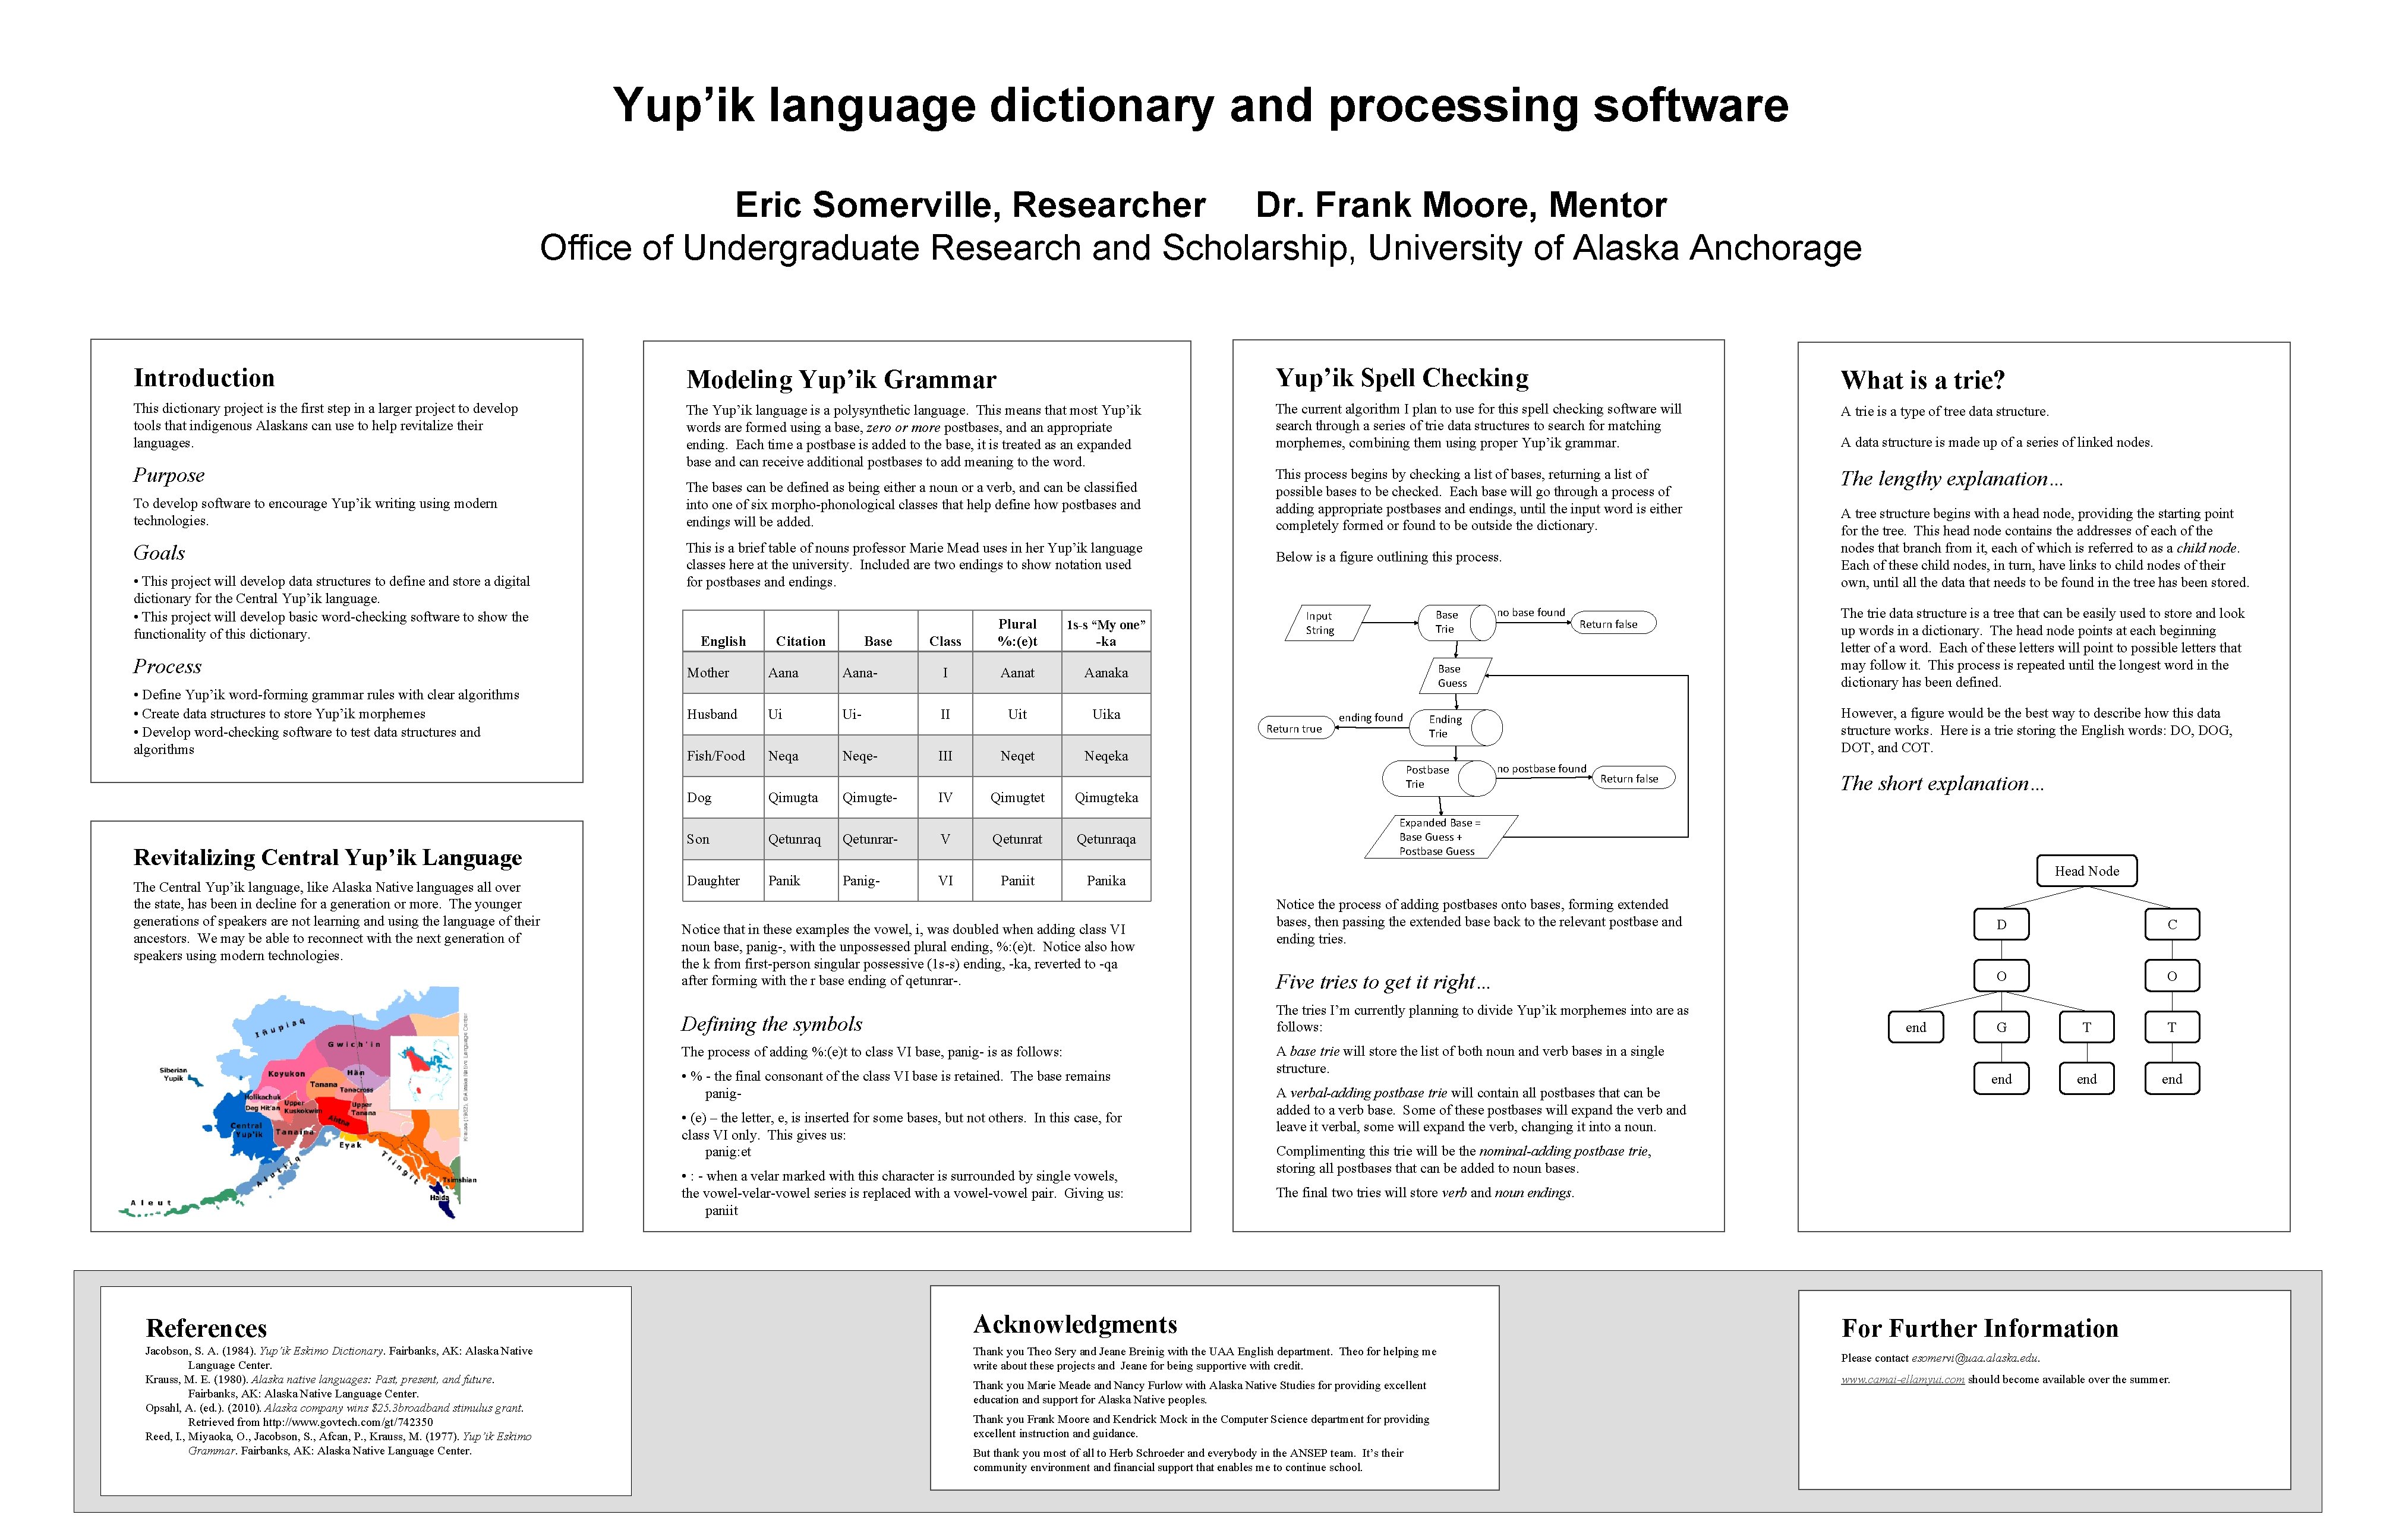 Yup’ik language dictionary and processing software Eric Somerville, Researcher Dr. Frank Moore, Mentor Office